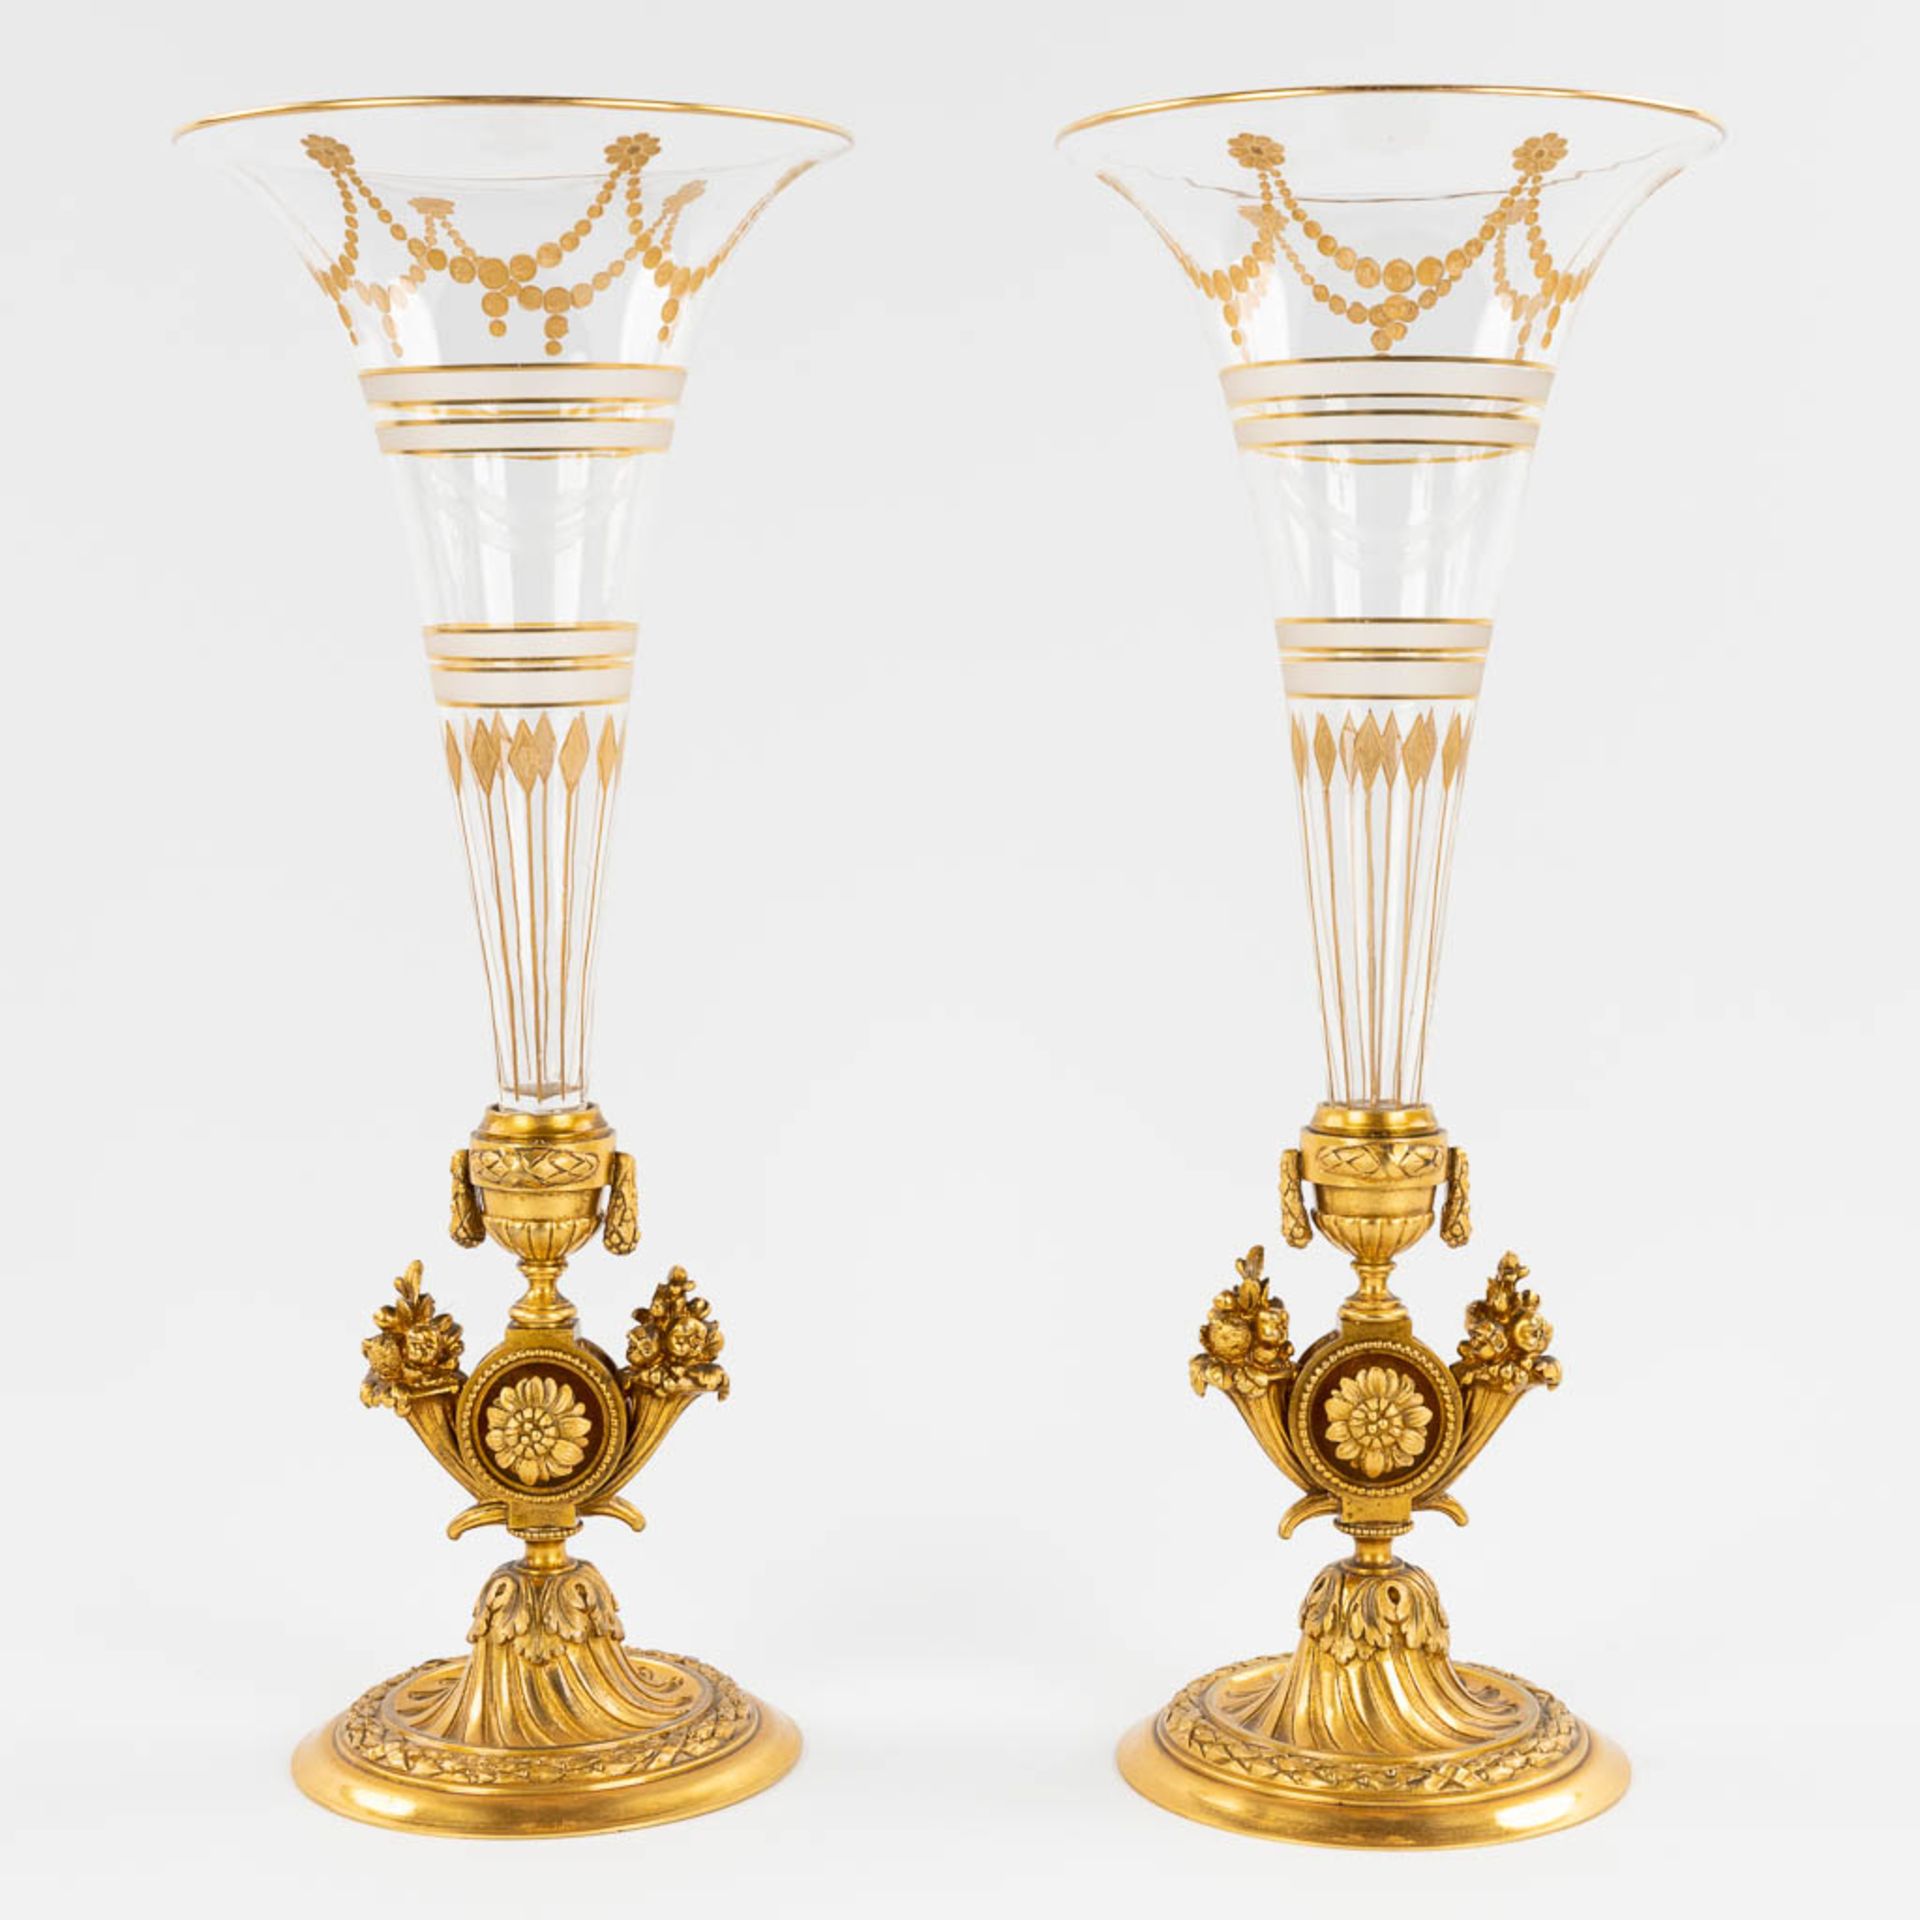 A pair of trumpet vases, gilt bronze and glass in Louis XVI style. 19th C. (H:31,5 x D:13 cm)